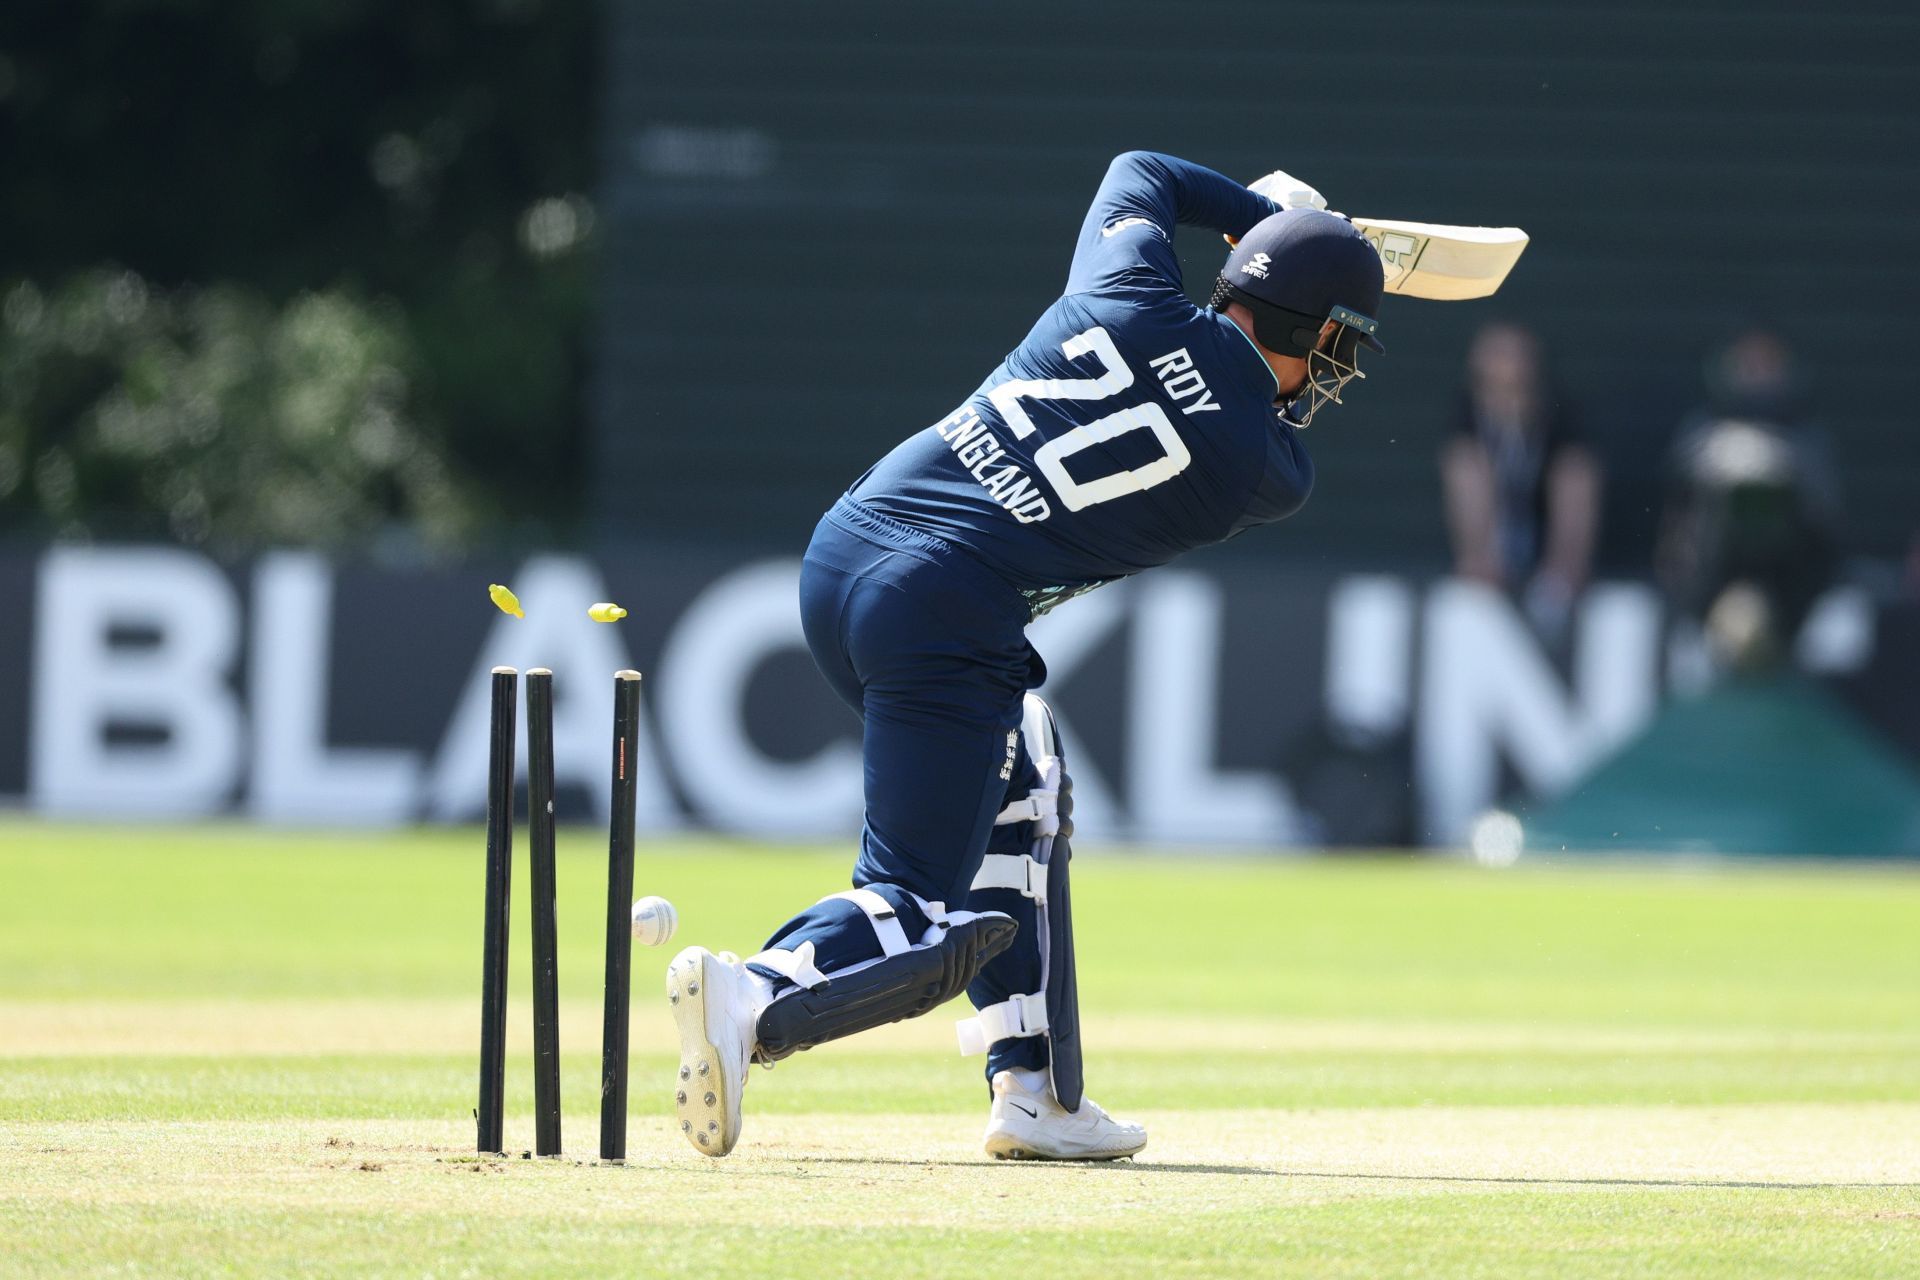 Jason Roy lost his stumps to his cousin brother Shane Snater in the first match of the ICC World Cup Super League series against the Netherlands (Image Courtesy: Getty Images)